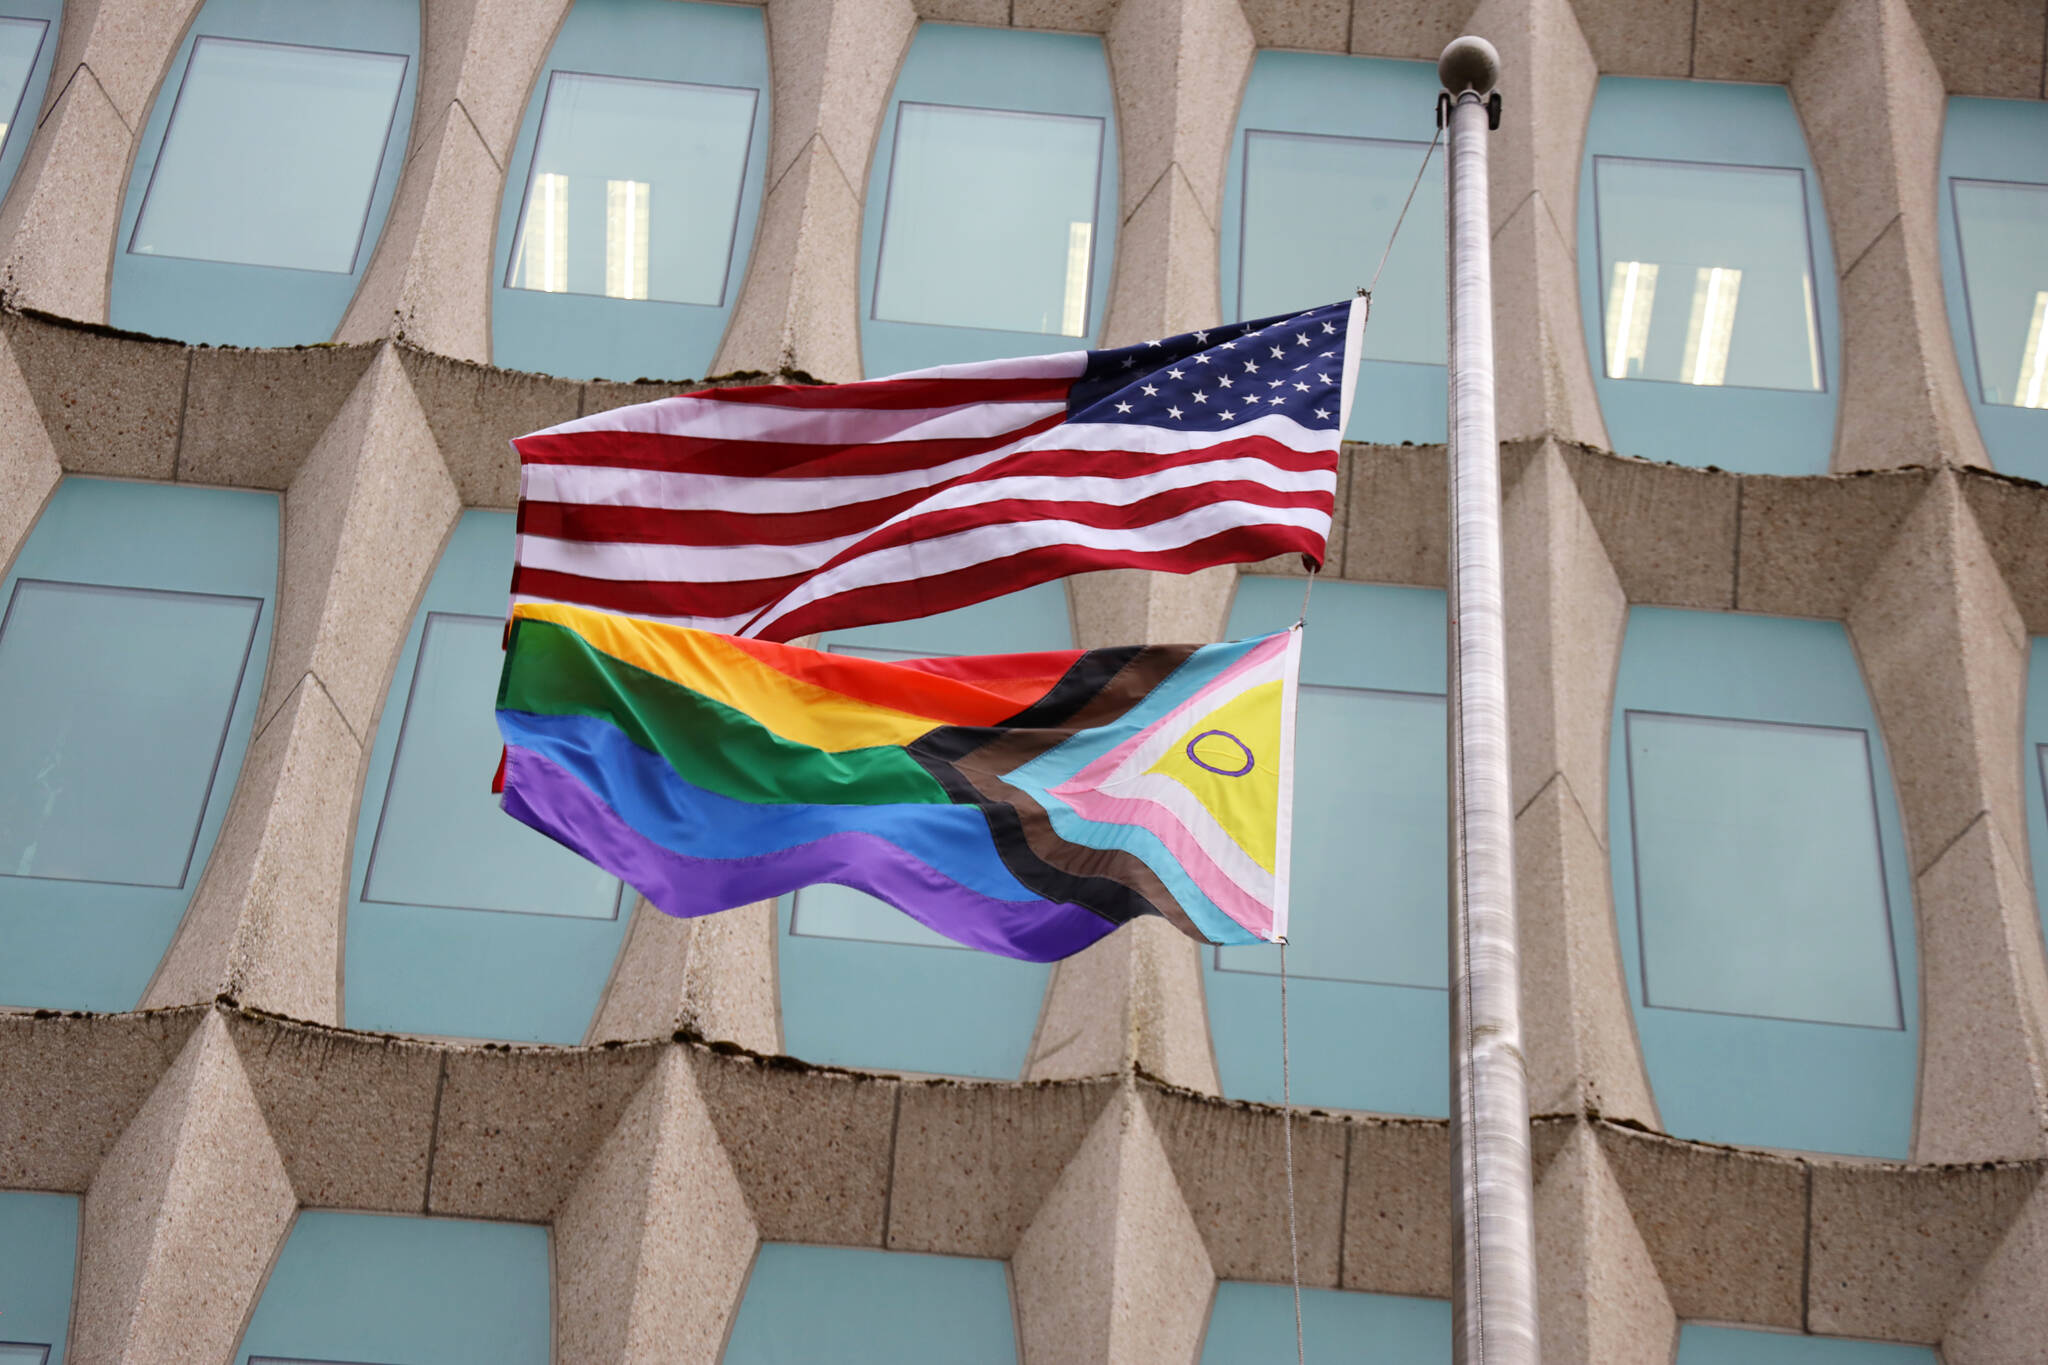 A progress pride flag flies in the wind below an U.S. flag outside of the Hurff Ackerman Saunders Federal Building on Monday evening. Last week the flag was raised for the first time by members of the National Oceanic Atmospheric Administration and will remain up through the month of June. (Clarise Larson / Juneau Empire)